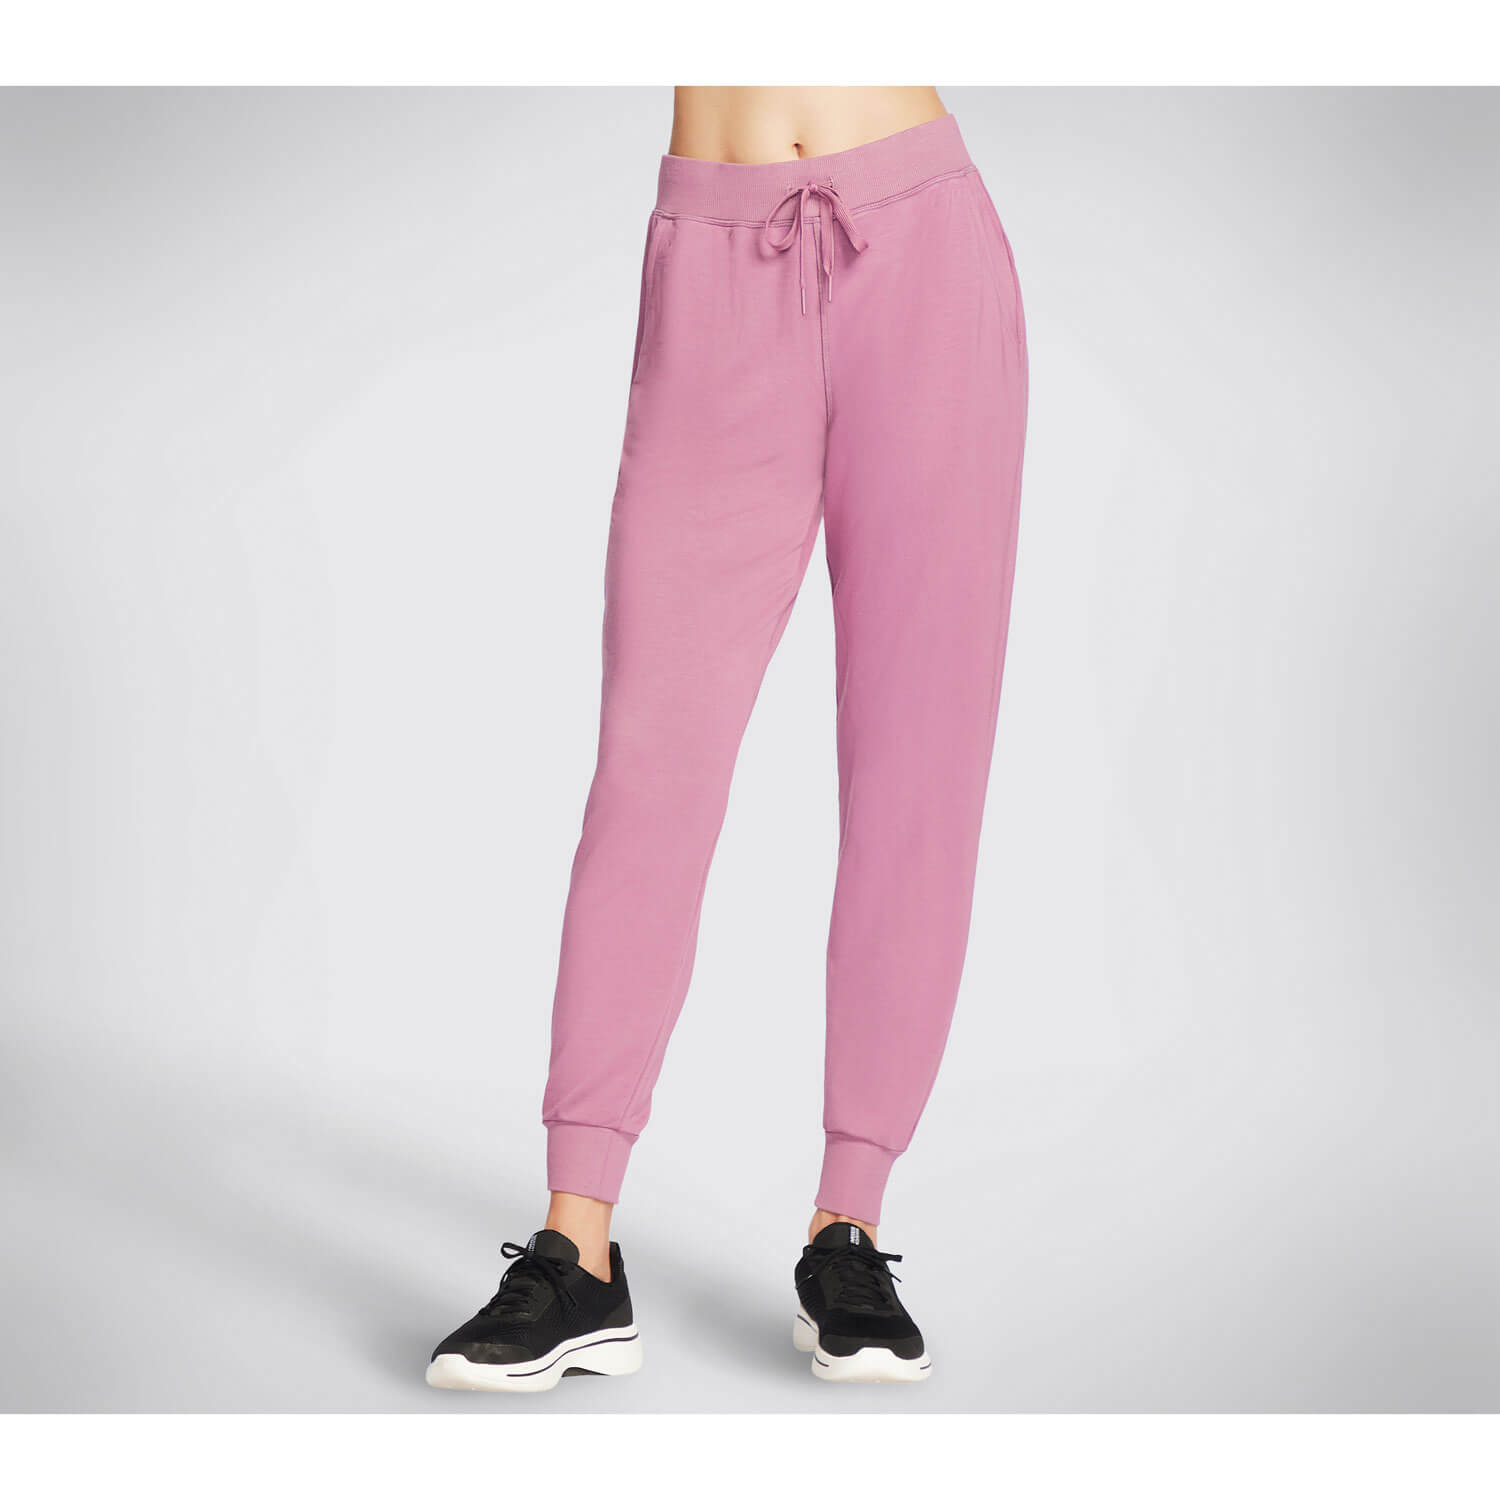 Skechers Apparel Skechluxe Restful Jogger Pant 1 Shaws Department Stores